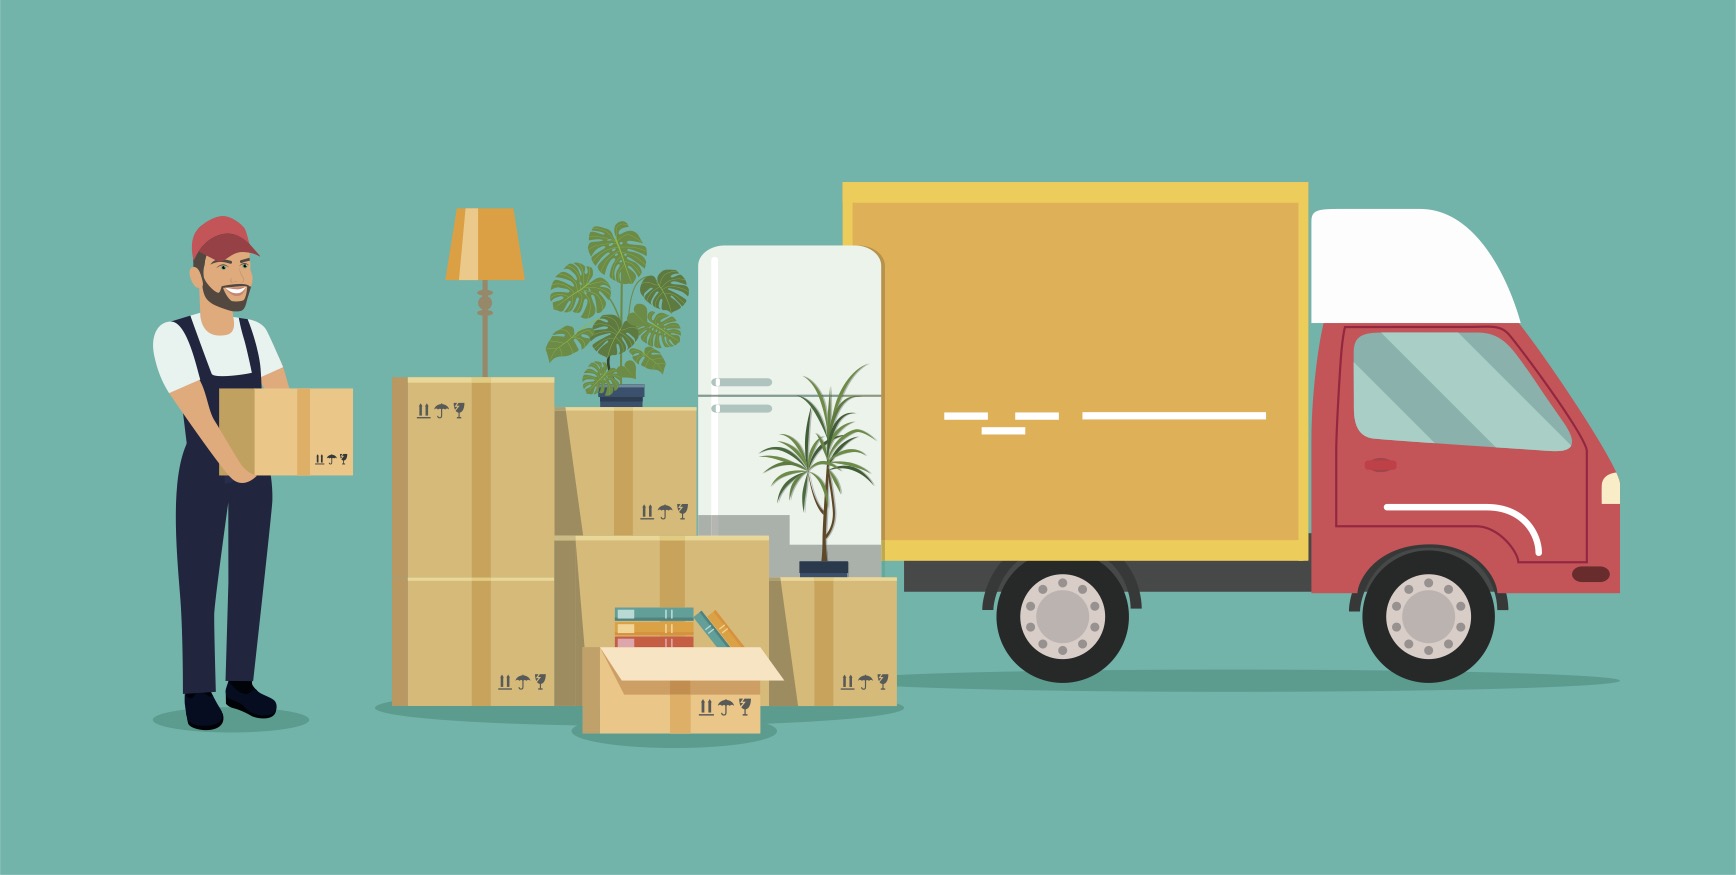 6 Crucial Things to Do Before Moving